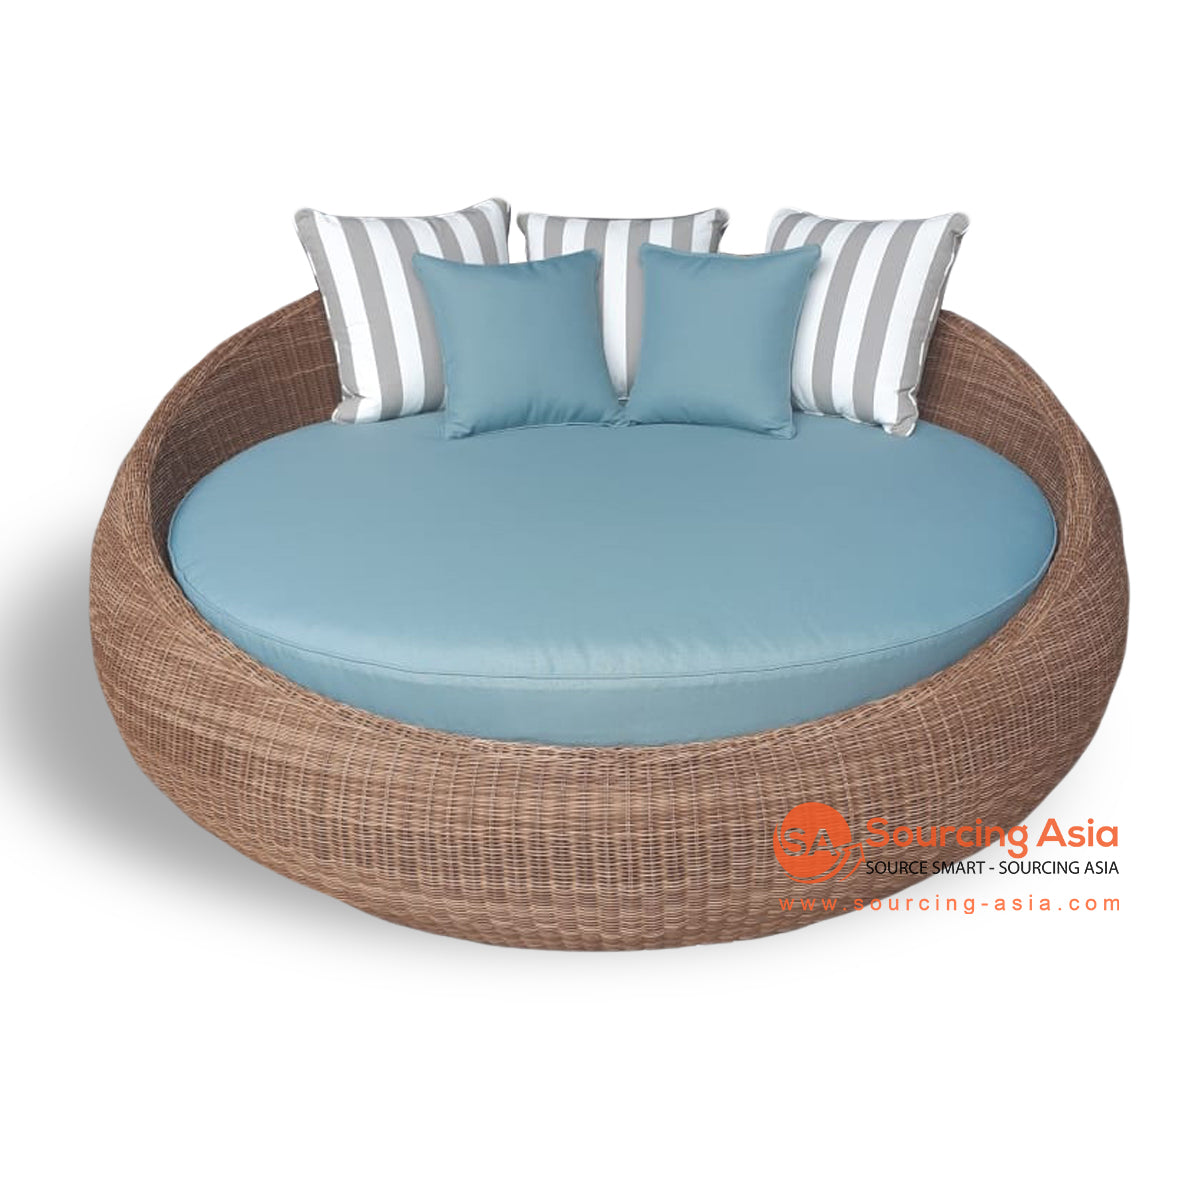 DJO032 NATURAL SYNTHETIC RATTAN ROUND OUTDOOR SUNLOUNGER (PRICE WITHOUT CUSHION)